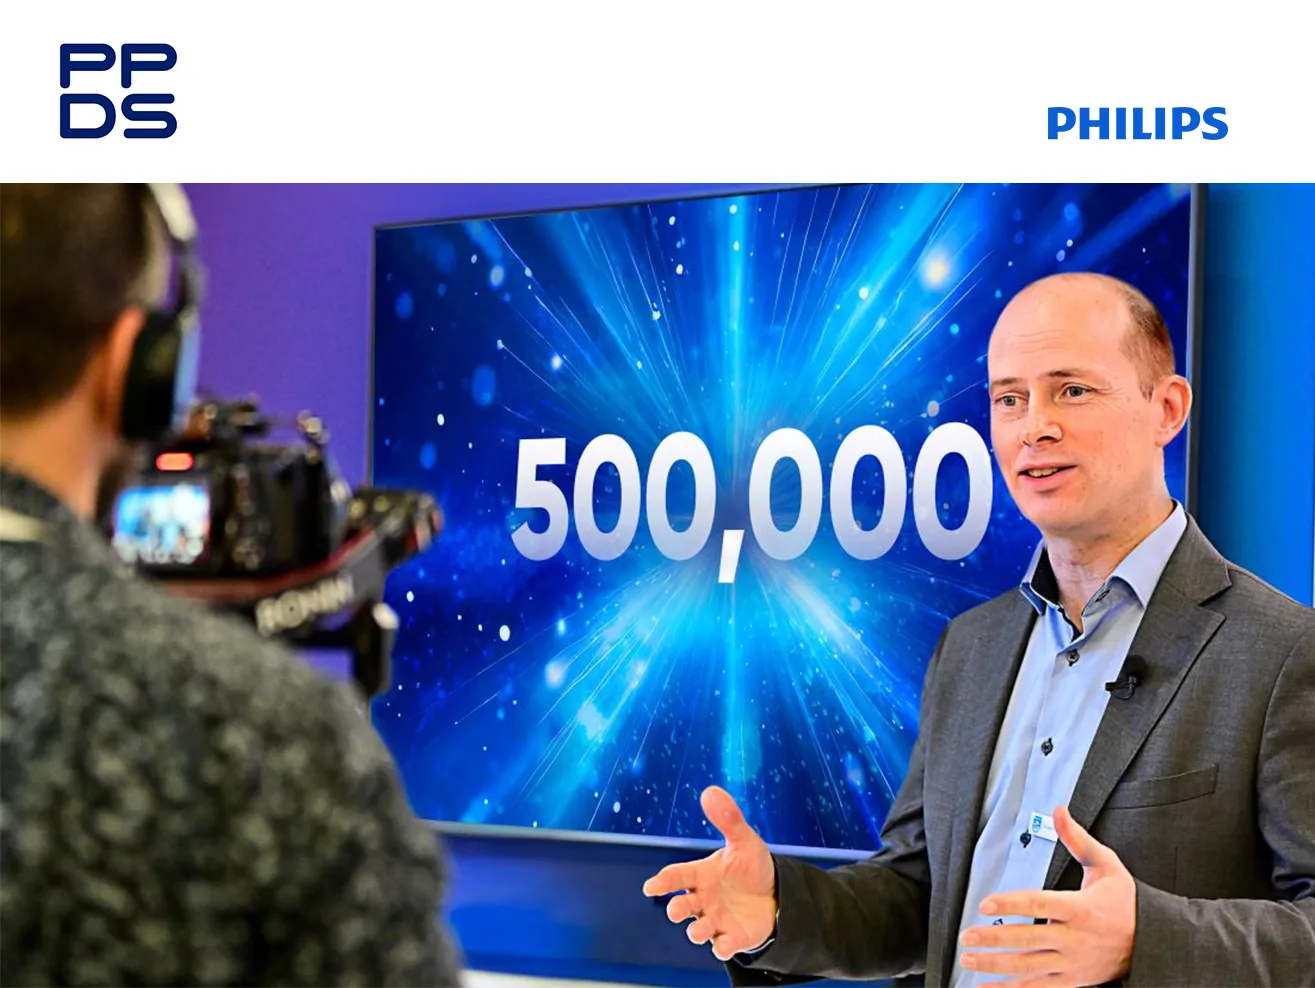 ppds announces over 500,000 philips mediasuite tvs sold worldwide